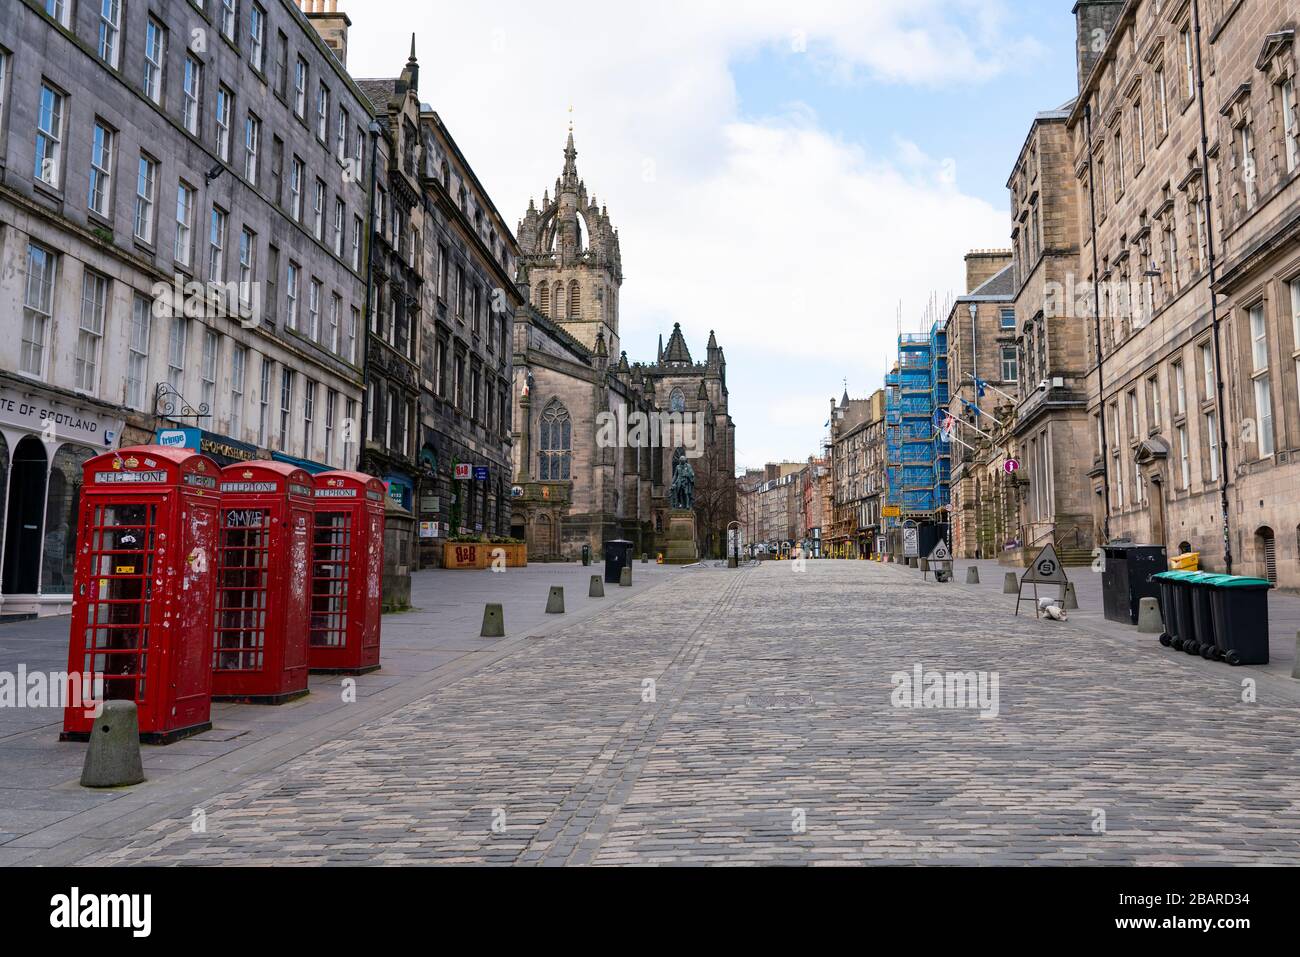 Edinburgh, Scotland, UK. 29 March, 2020. Life in Edinburgh on the first Sunday of the Coronavirus lockdown. Streets deserted, shops and restaurants closed, very little traffic on streets and reduced public transport. Pictured; The Royal Mile. Iain Masterton/Alamy Live News Stock Photo